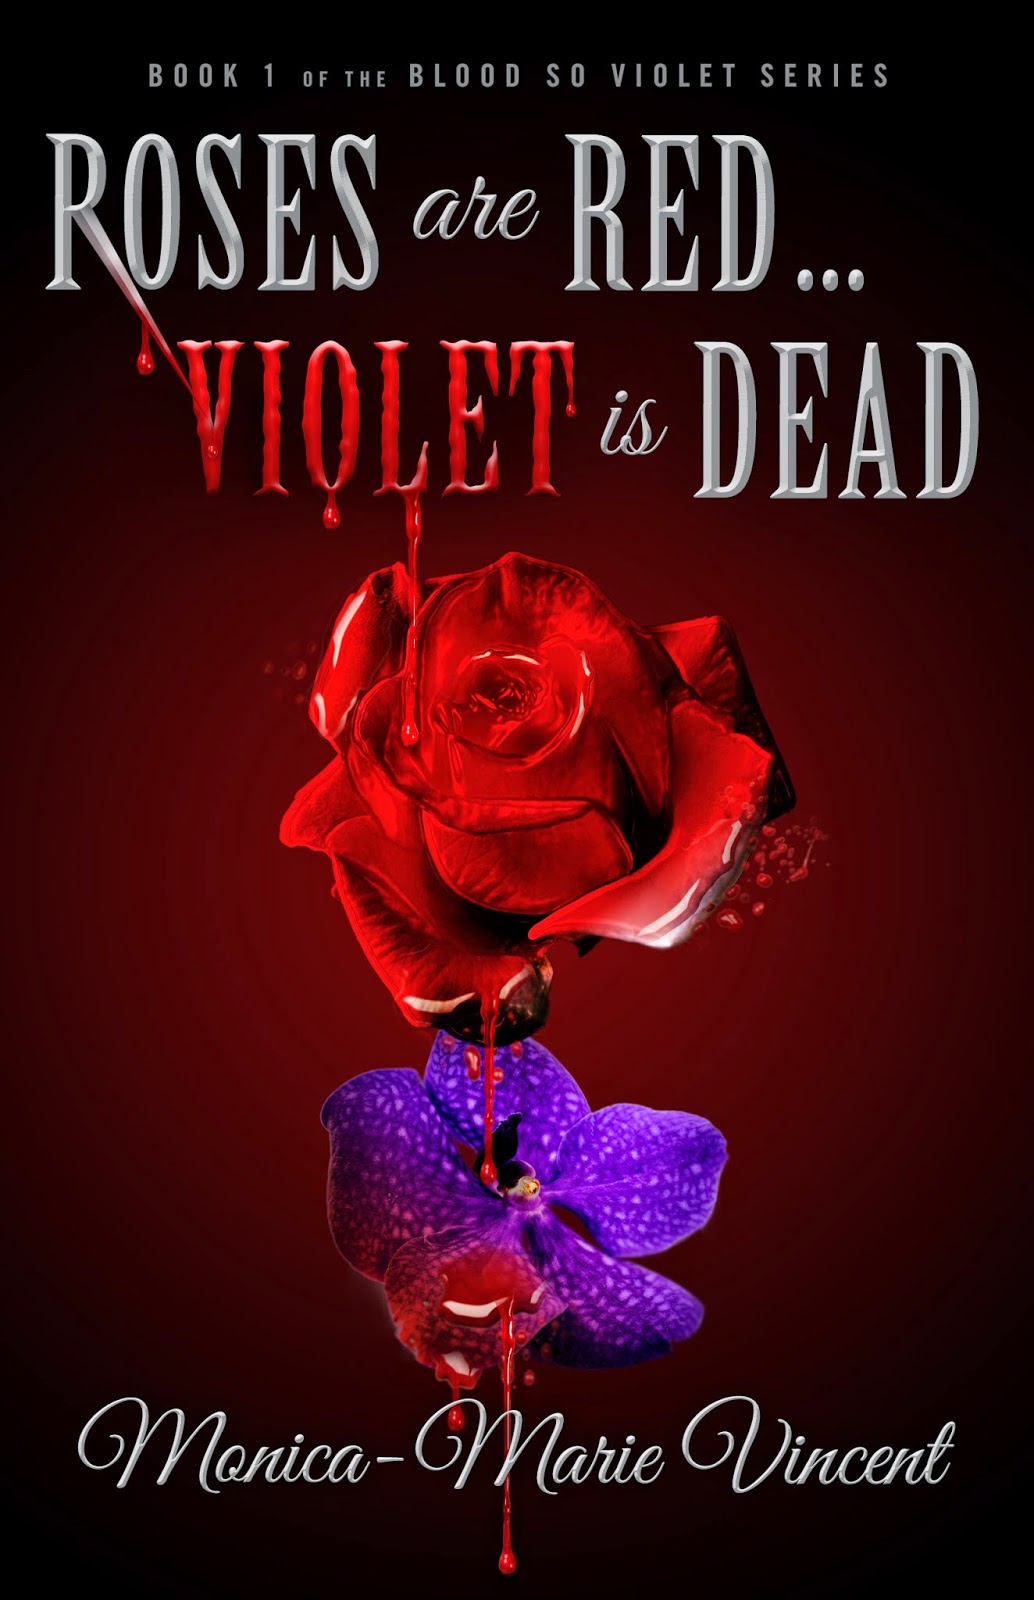 Cover Reveal for Roses are Red…Violet is Dead by Monica-Marie Vincent with Giveaway